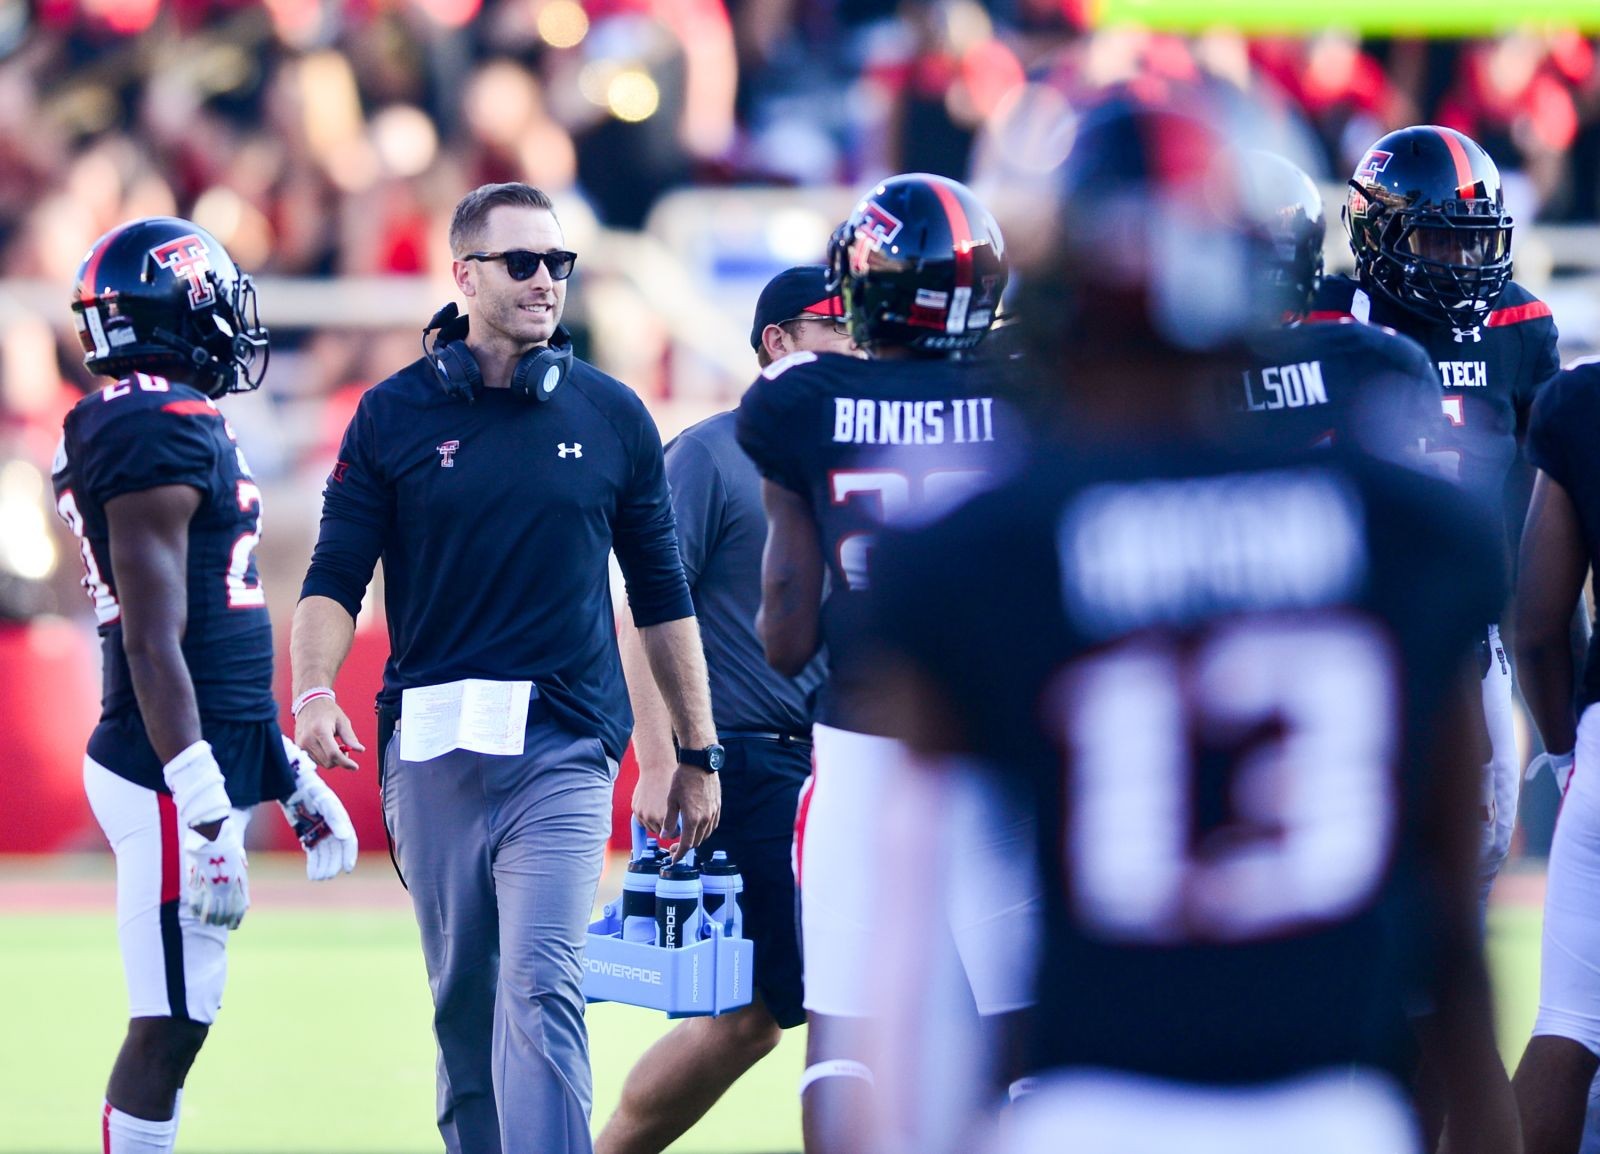 USC football: What stands out about Kliff Kingsbury and the Air Raid